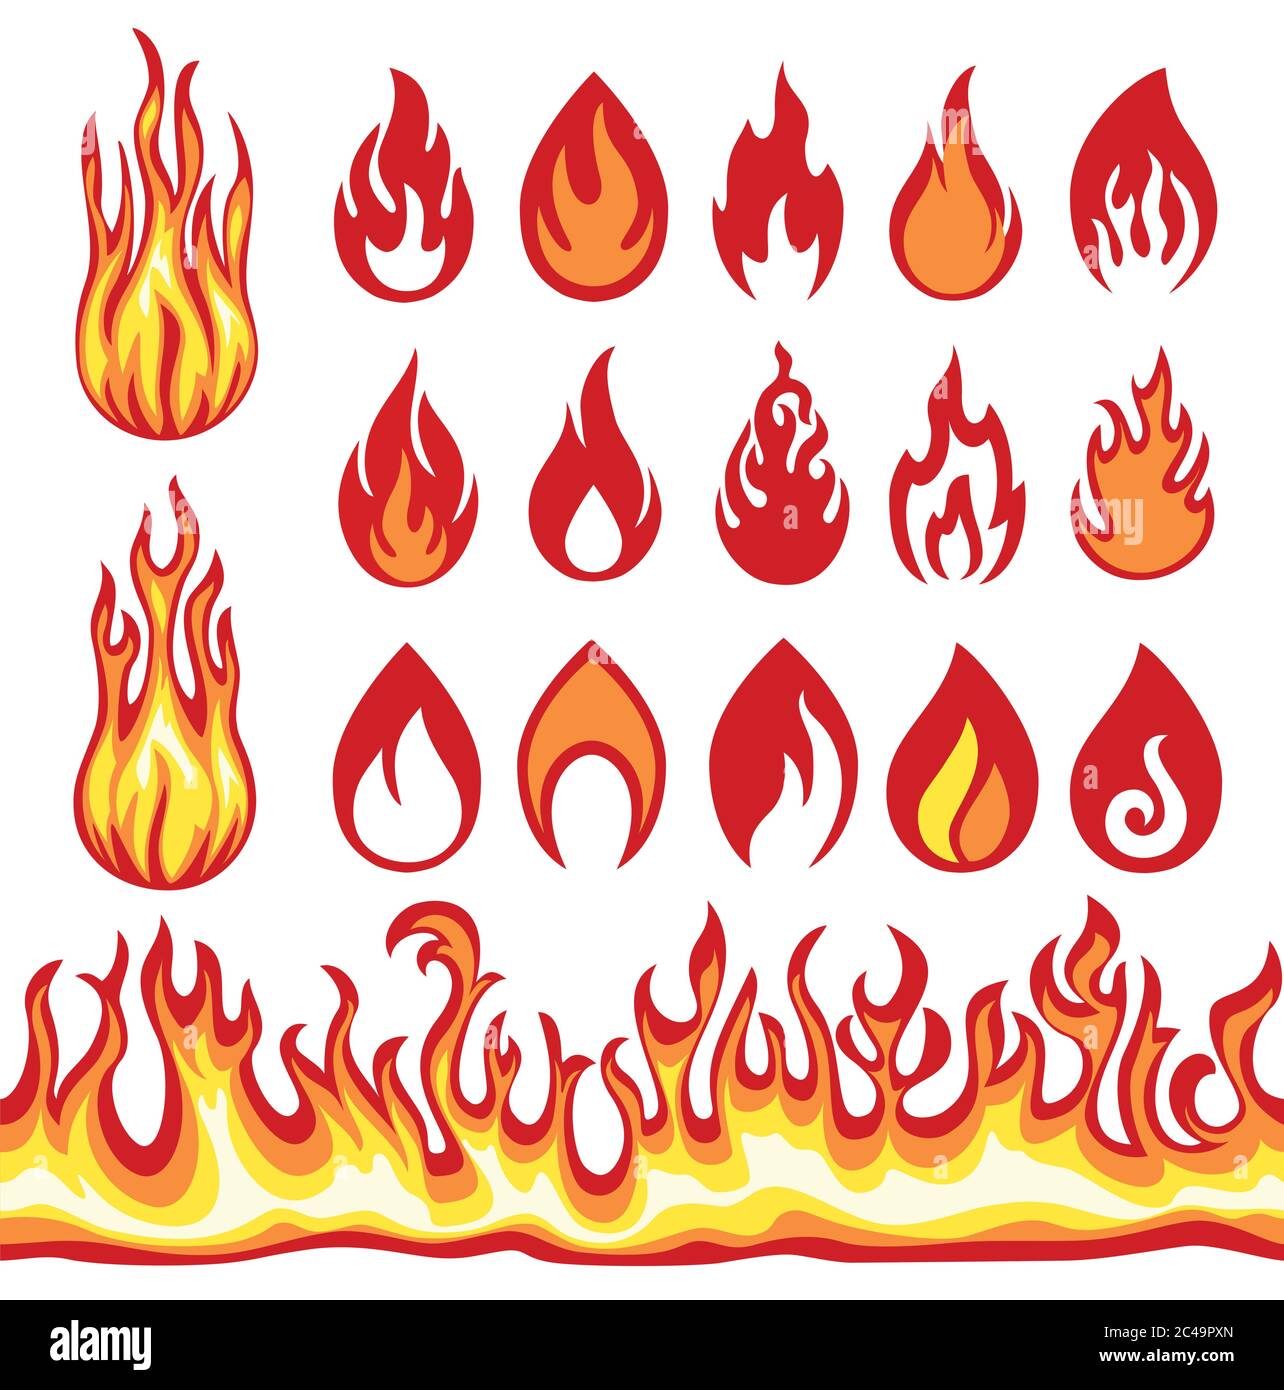 Set of Flame icons. Fire symbols. Vector illustration. Stock Vector